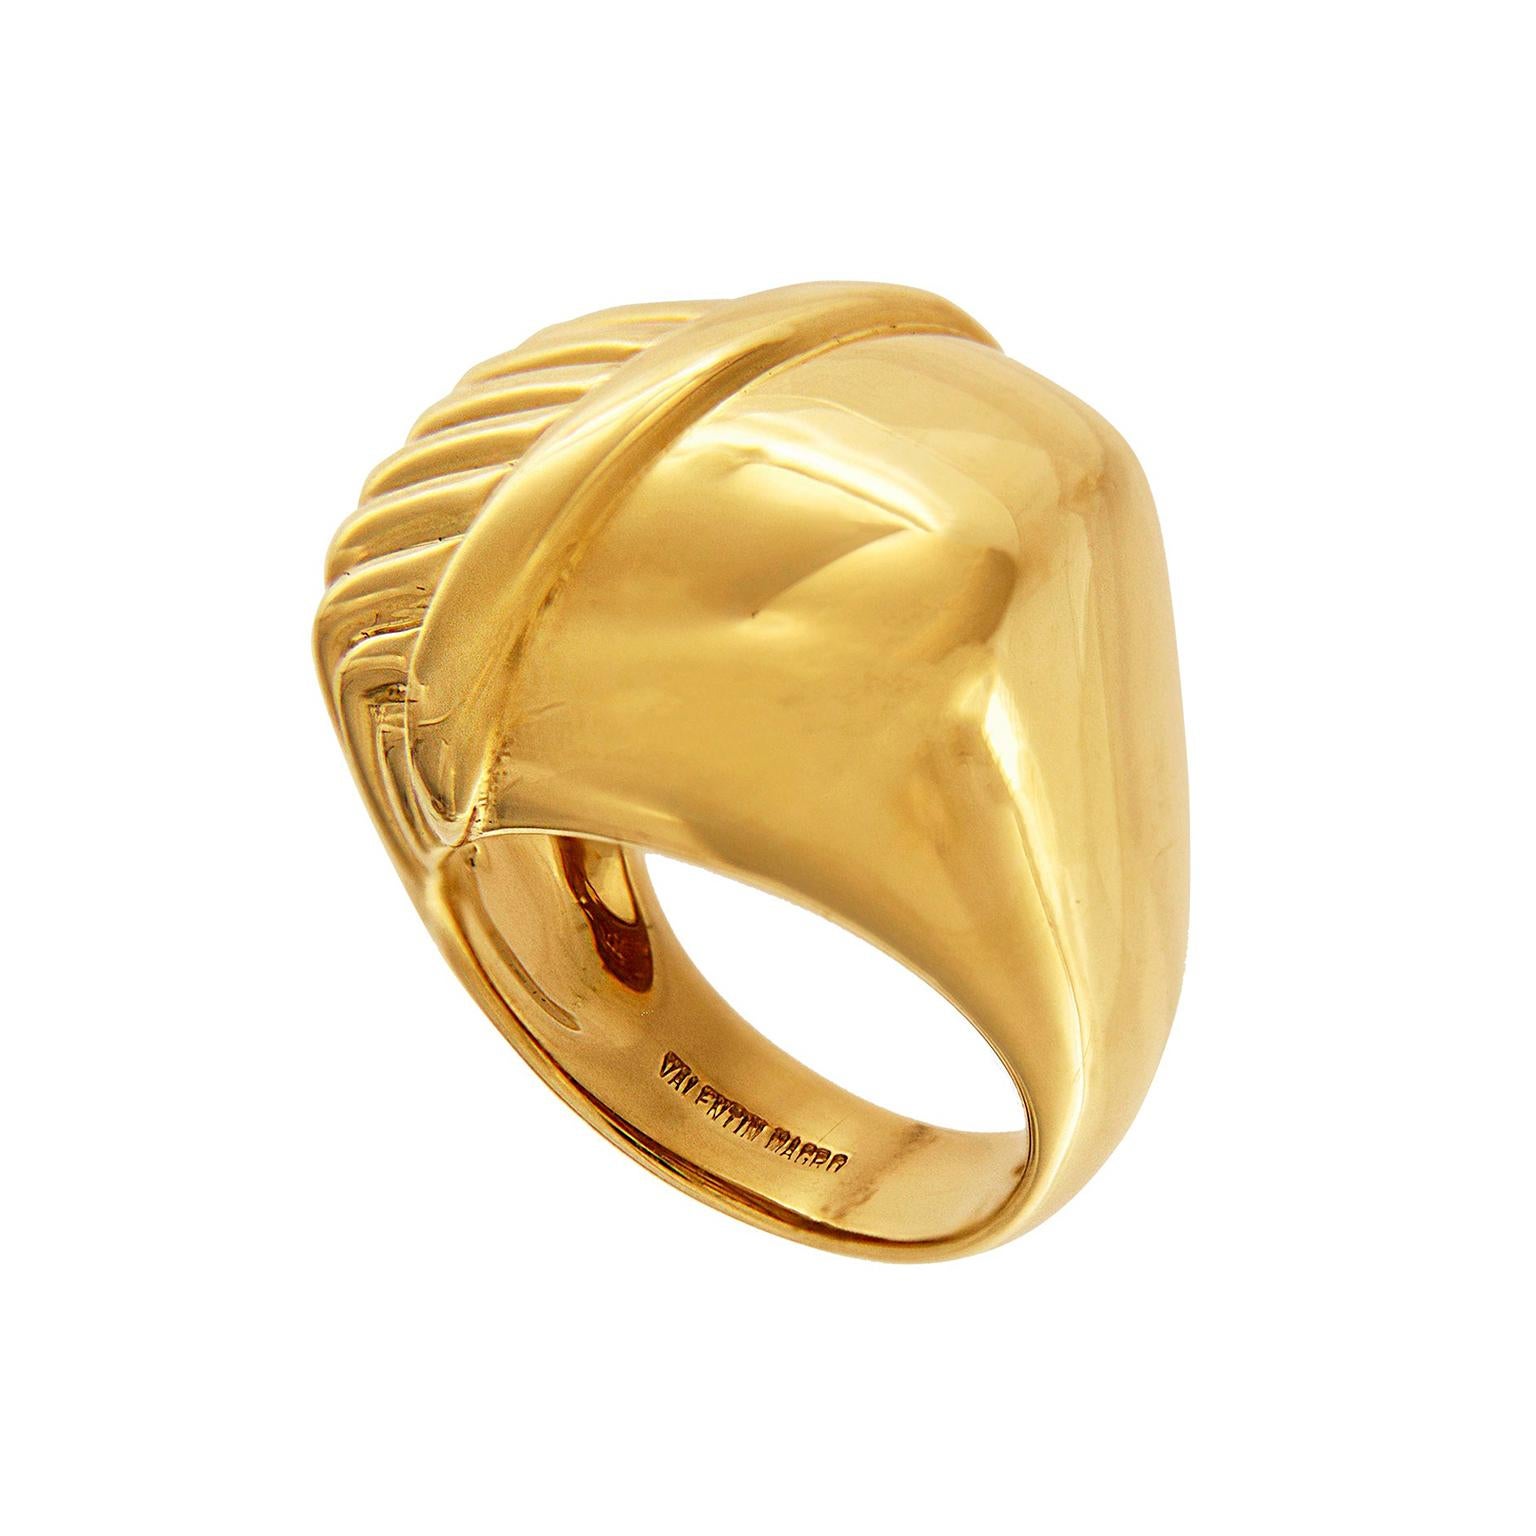 This unique ring created by Valentin Magro features half woven texture with high polish finish that conveys an art deco but modern look. The ring is completed in 18kt Yellow Gold. Current finger size is 6.5 and is adjustable upon request. Modern and